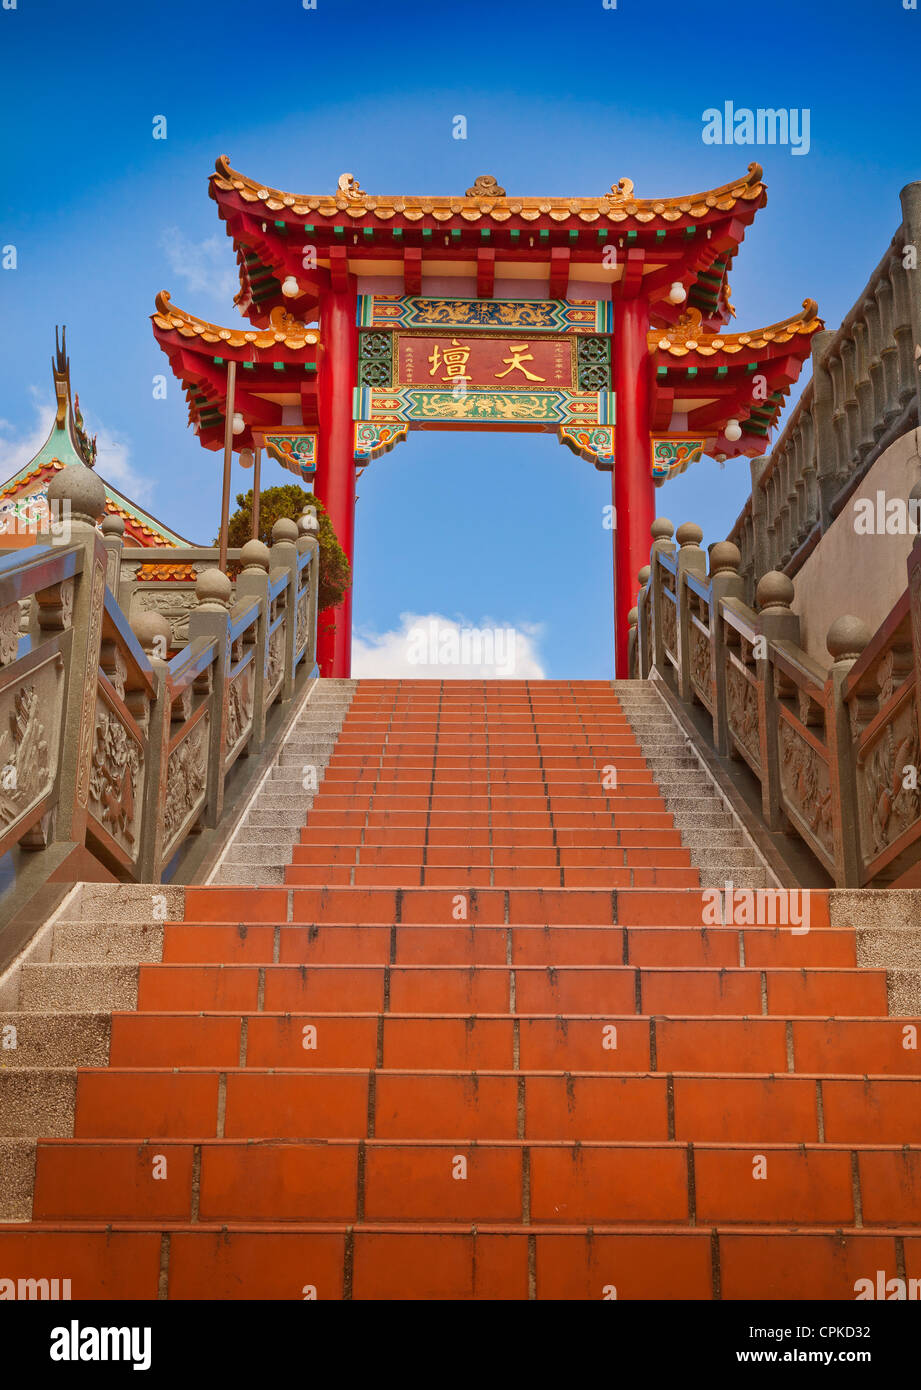 Chinese pagoda styled architecture, Chin Swee Cave Temple, Genting Highlands, Malaysia. Stock Photo